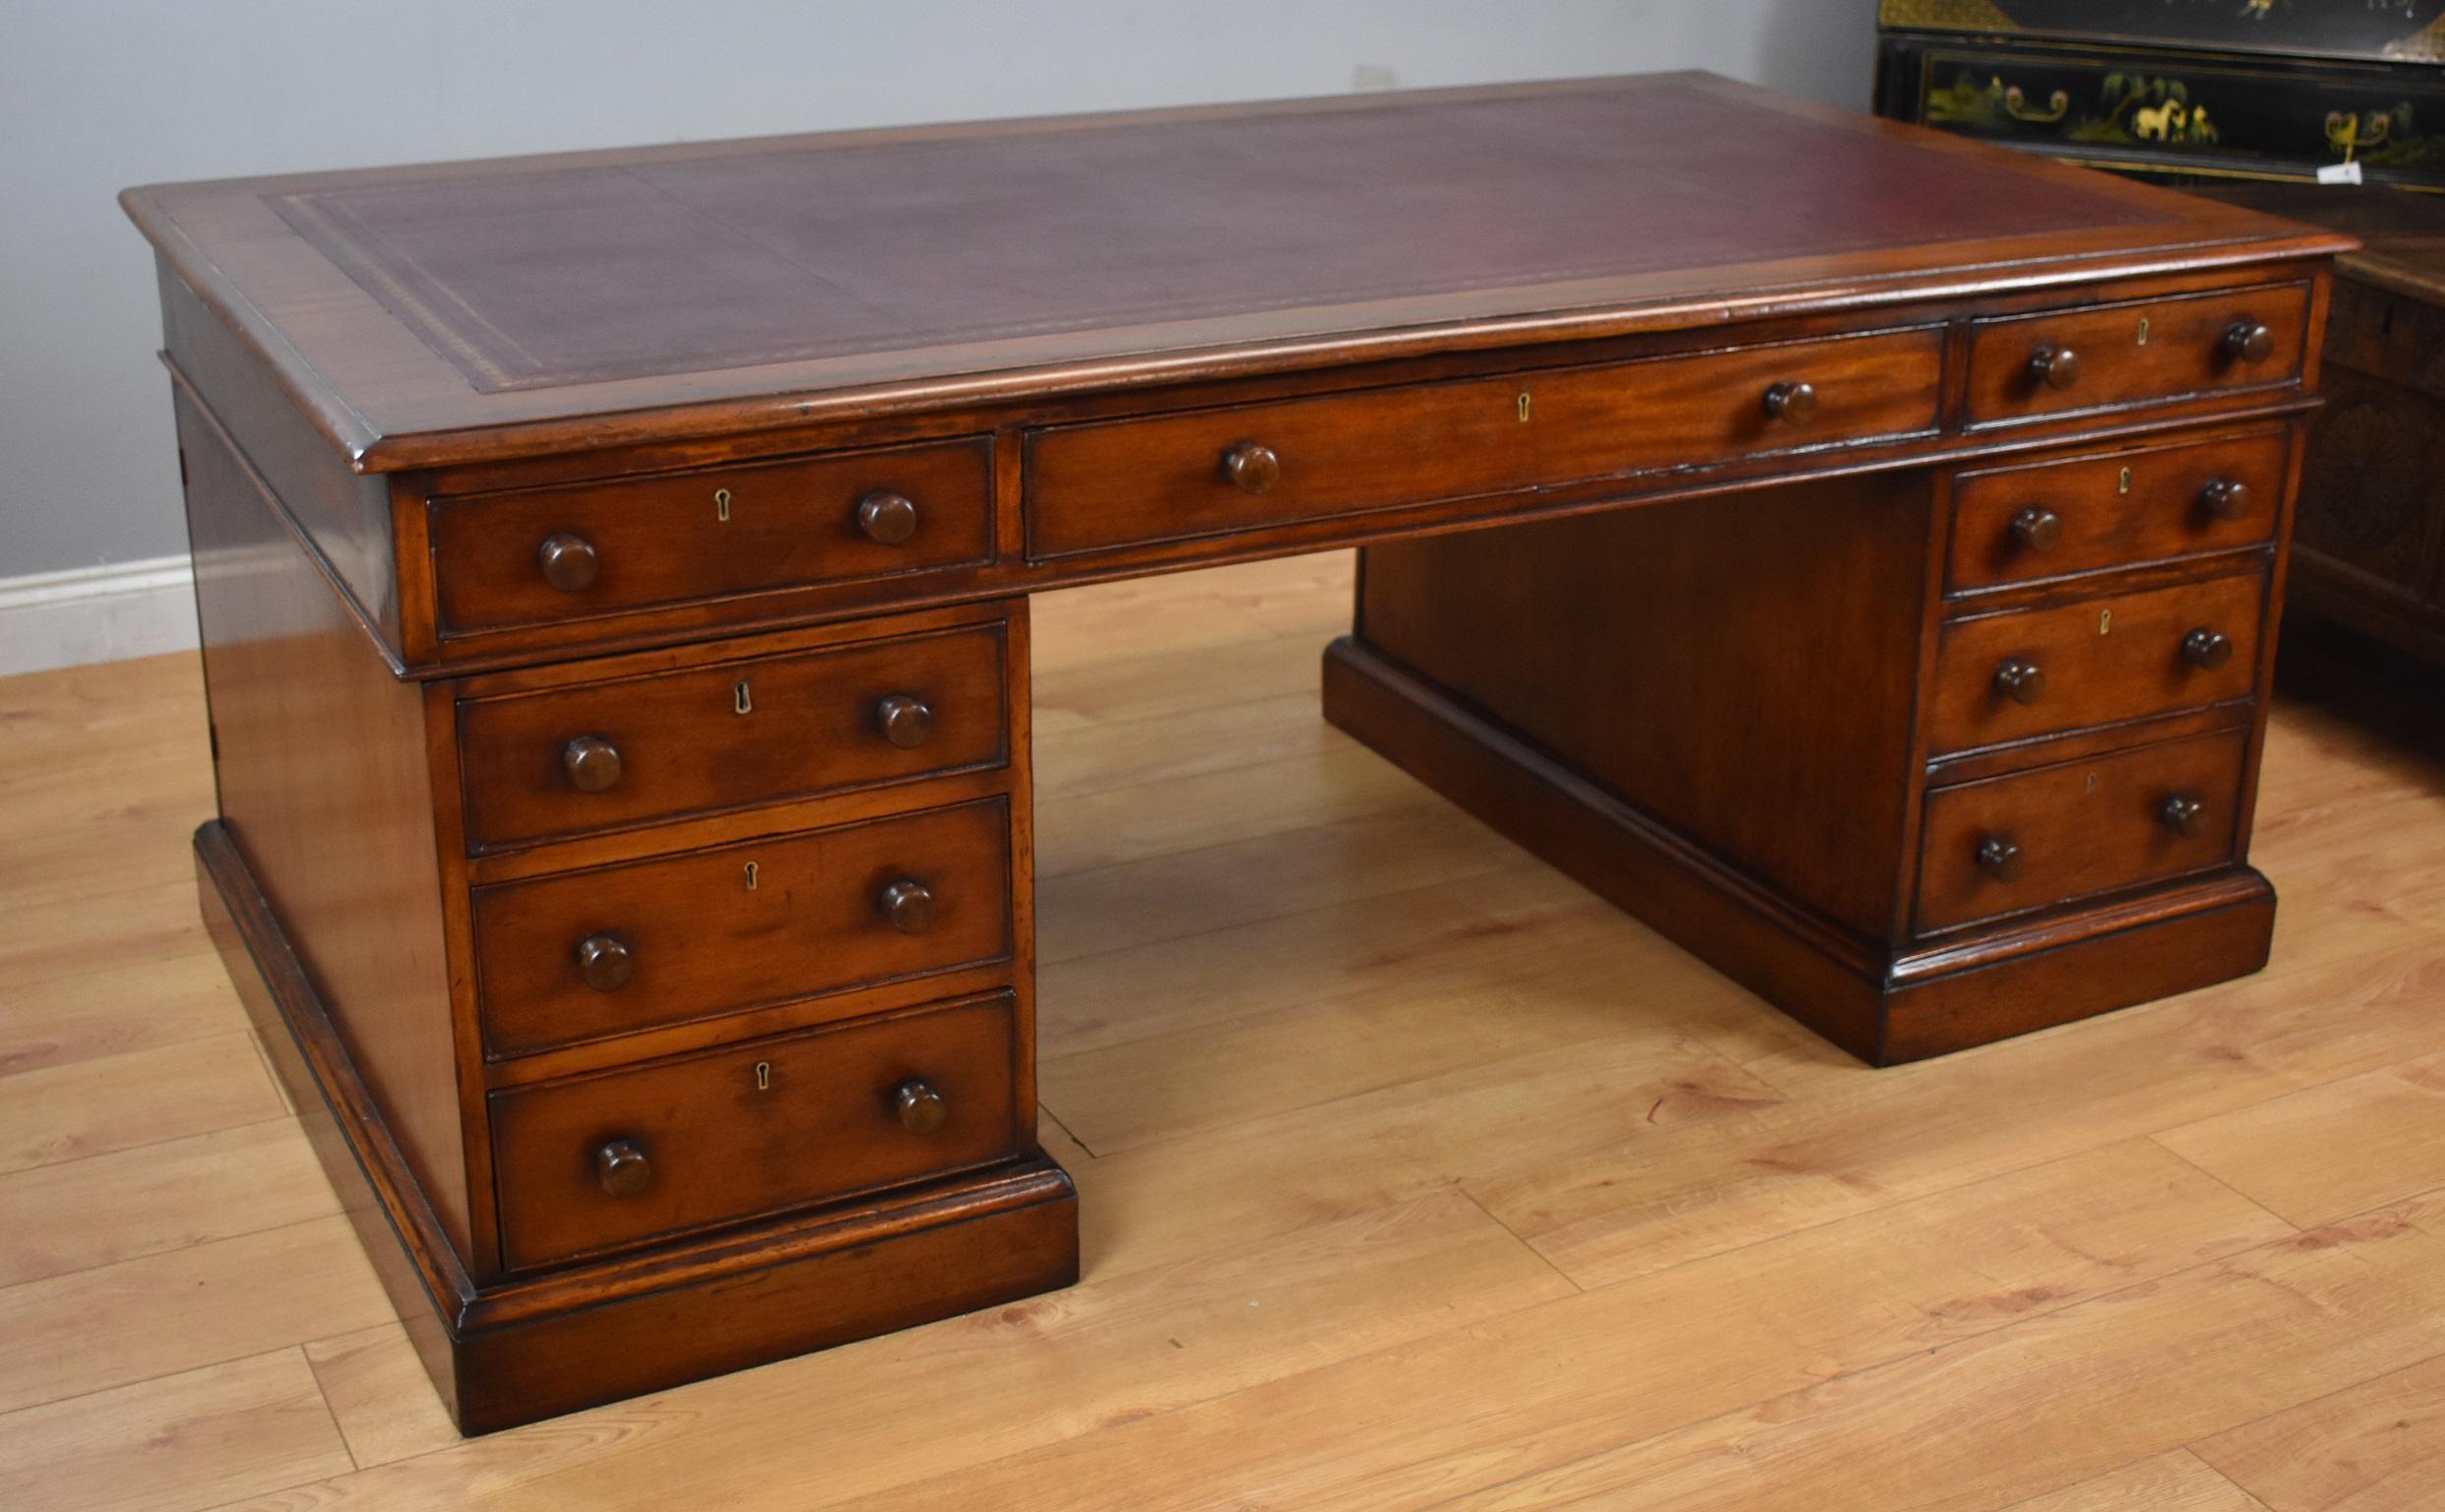 For sale is a good quality Victorian mahogany partners desk. The top inset with a maroon leather, decorated with blind and gold tooling, above three drawers to the front (two short, with one long drawer in the centre) with the same combination on